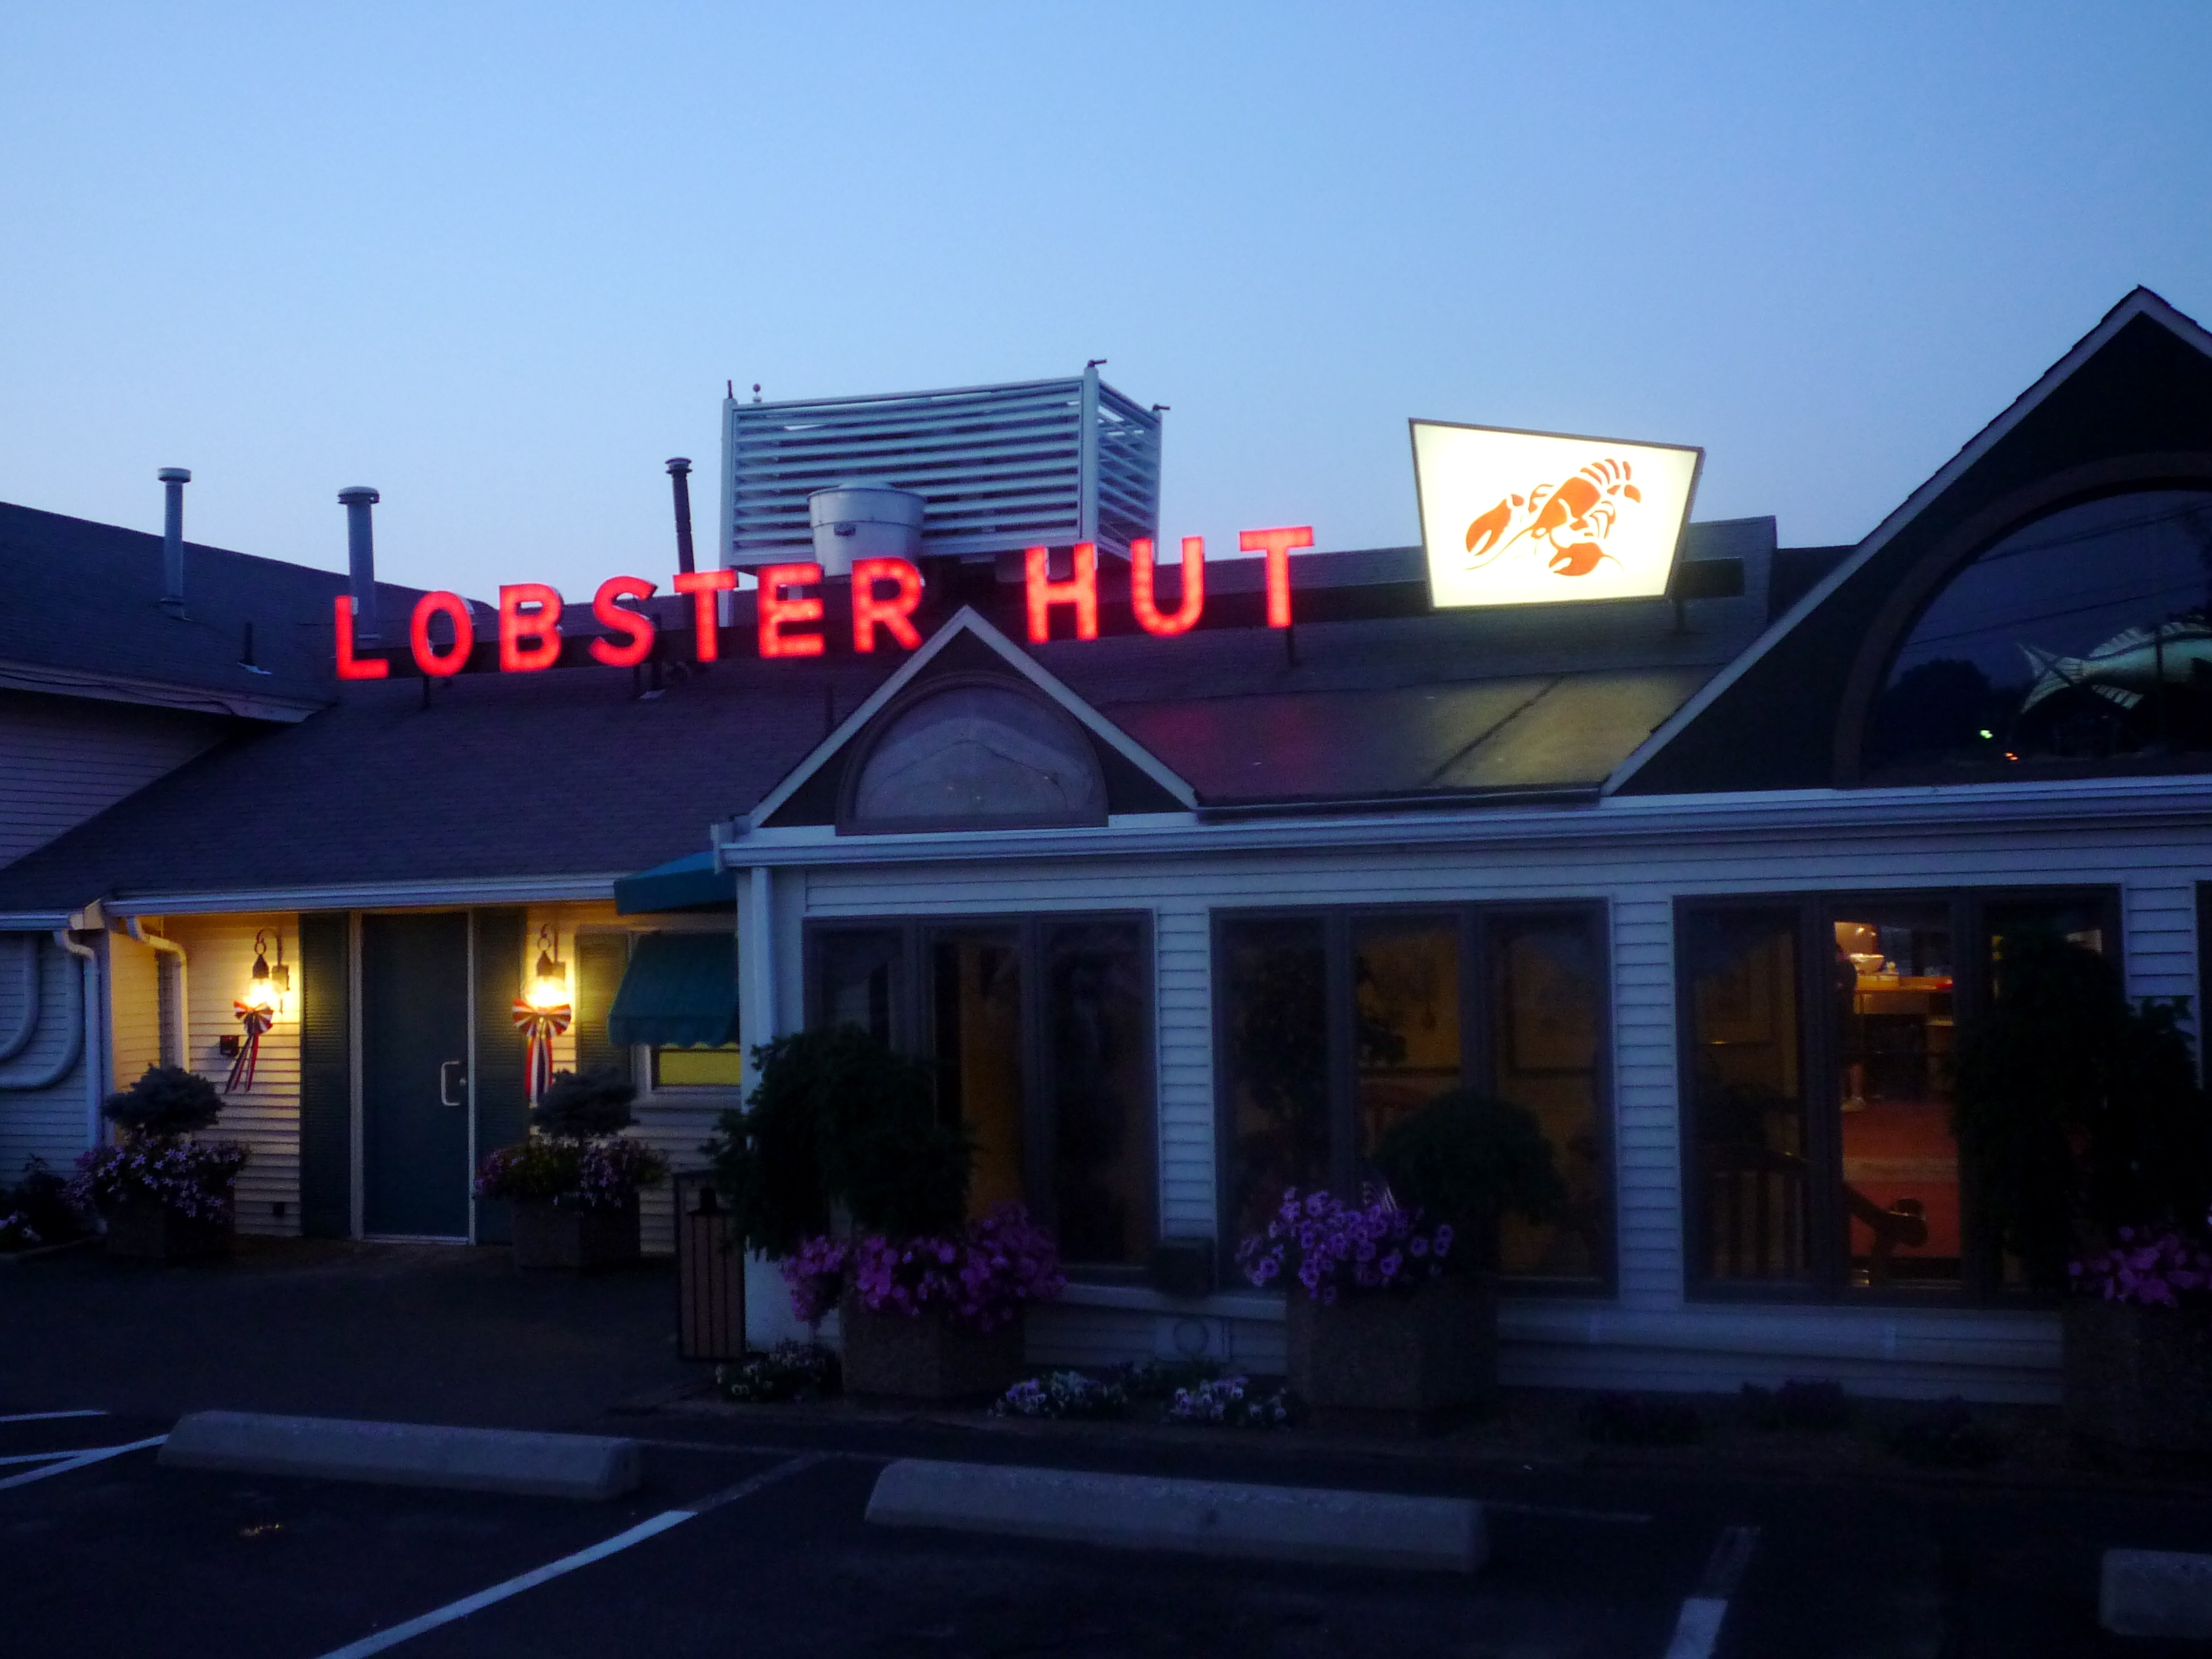 Picture of The Lobster Hut restaurant, Plymouth, Mass.